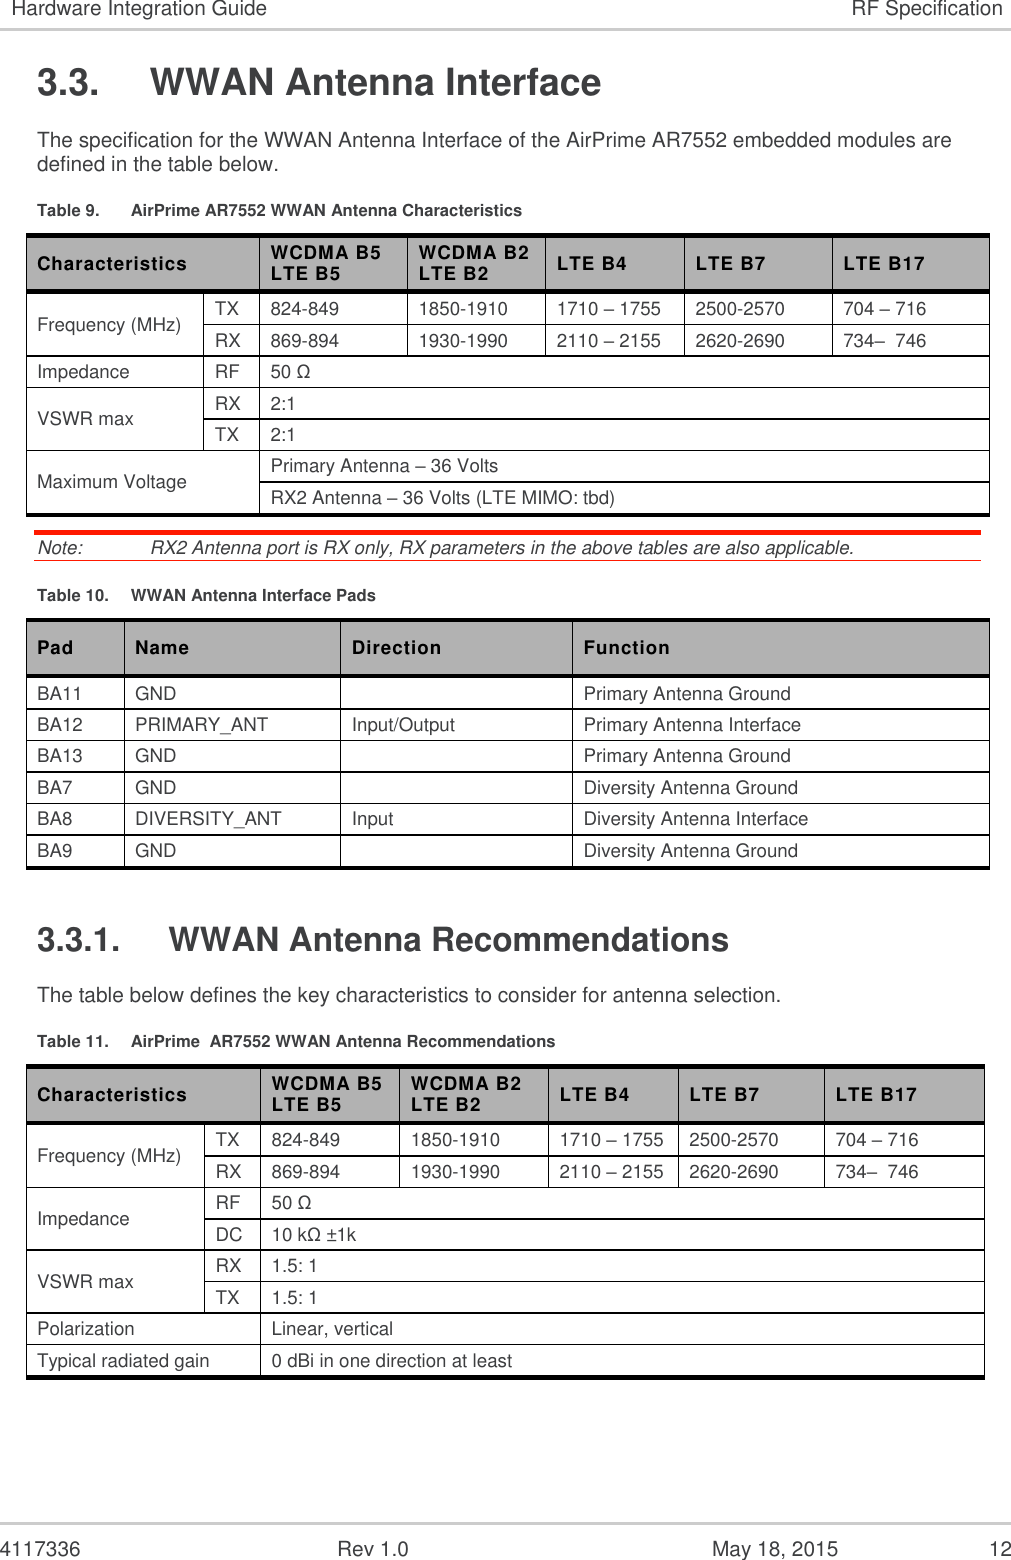   4117336  Rev 1.0  May 18, 2015  12 Hardware Integration Guide RF Specification 3.3.  WWAN Antenna Interface The specification for the WWAN Antenna Interface of the AirPrime AR7552 embedded modules are defined in the table below. Table 9.  AirPrime AR7552 WWAN Antenna Characteristics Characteristics WCDMA B5 LTE B5 WCDMA B2 LTE B2 LTE B4 LTE B7 LTE B17 Frequency (MHz) TX 824-849 1850-1910 1710 – 1755 2500-2570 704 – 716 RX 869-894 1930-1990 2110 – 2155 2620-2690 734–  746 Impedance RF 50 Ω VSWR max RX 2:1 TX 2:1 Maximum Voltage Primary Antenna – 36 Volts RX2 Antenna – 36 Volts (LTE MIMO: tbd) Note:   RX2 Antenna port is RX only, RX parameters in the above tables are also applicable. Table 10.  WWAN Antenna Interface Pads Pad Name Direction Function BA11 GND  Primary Antenna Ground BA12 PRIMARY_ANT Input/Output Primary Antenna Interface BA13 GND  Primary Antenna Ground BA7 GND  Diversity Antenna Ground BA8 DIVERSITY_ANT Input Diversity Antenna Interface BA9 GND  Diversity Antenna Ground 3.3.1.  WWAN Antenna Recommendations The table below defines the key characteristics to consider for antenna selection. Table 11.  AirPrime  AR7552 WWAN Antenna Recommendations Characteristics WCDMA B5 LTE B5 WCDMA B2 LTE B2 LTE B4 LTE B7 LTE B17 Frequency (MHz) TX 824-849 1850-1910 1710 – 1755 2500-2570 704 – 716 RX 869-894 1930-1990 2110 – 2155 2620-2690 734–  746 Impedance RF 50 Ω DC 10 kΩ ±1k VSWR max RX 1.5: 1 TX 1.5: 1 Polarization Linear, vertical Typical radiated gain 0 dBi in one direction at least 